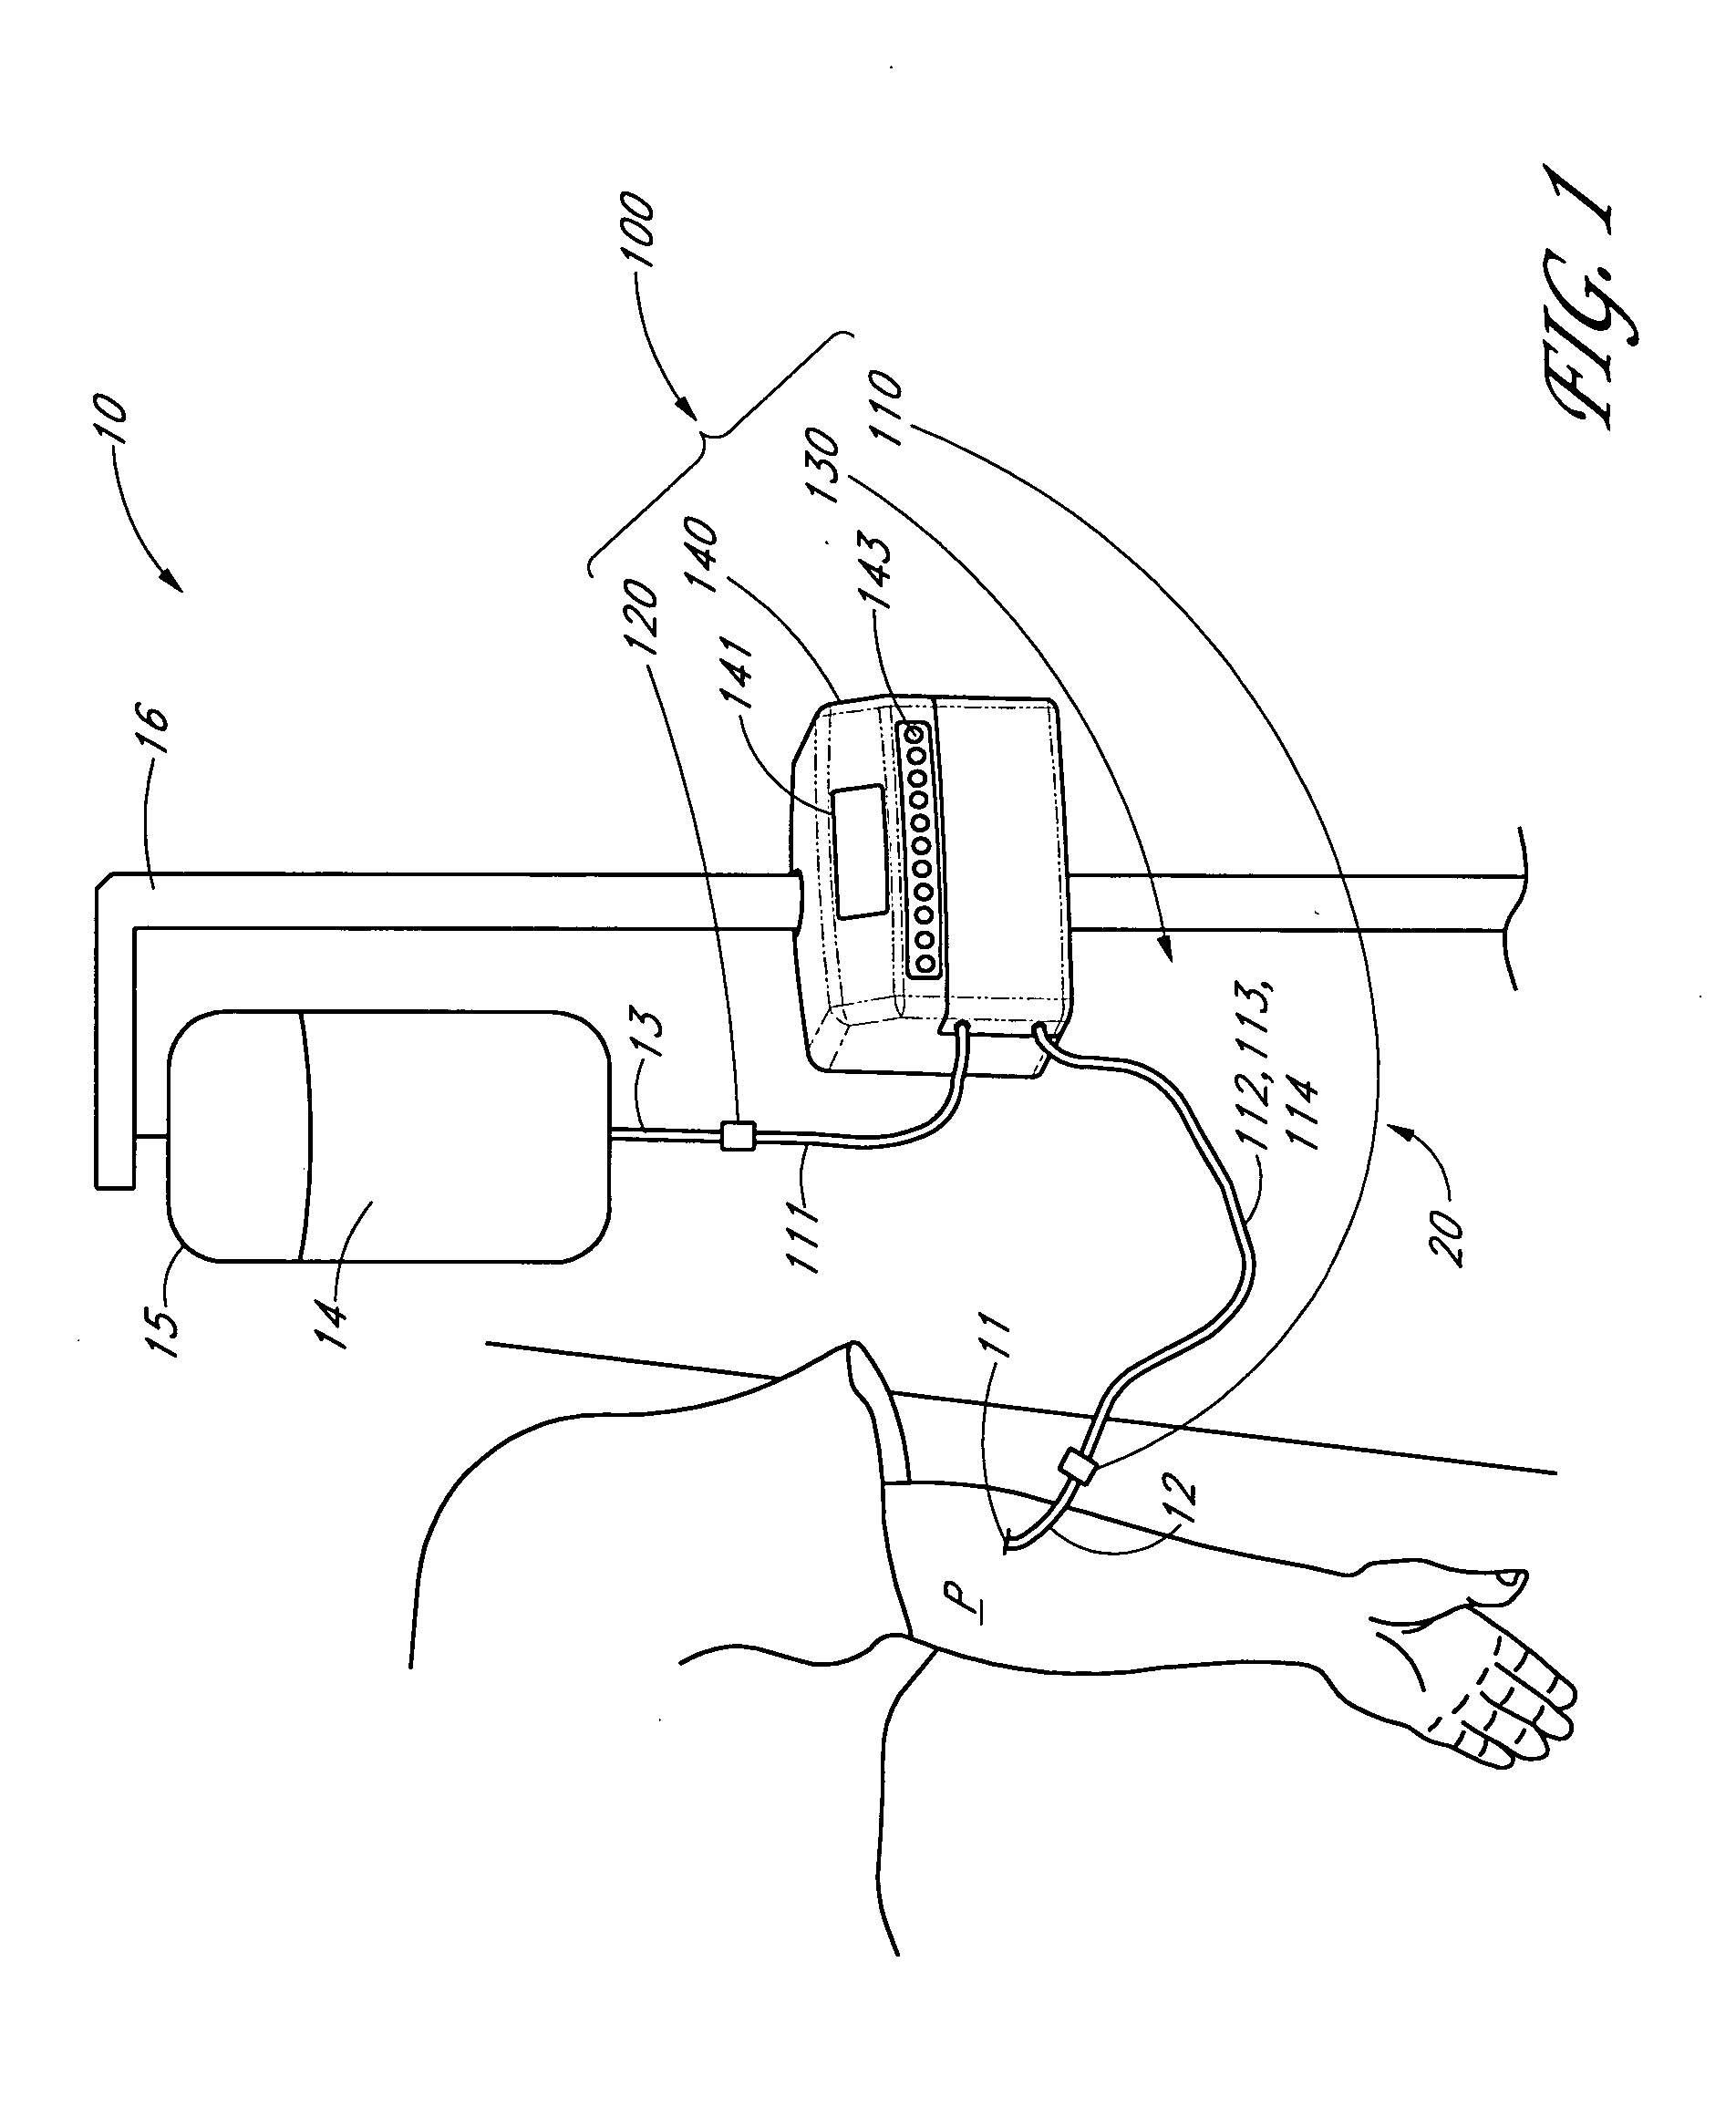 Analyte detection system with user interface providing trend display